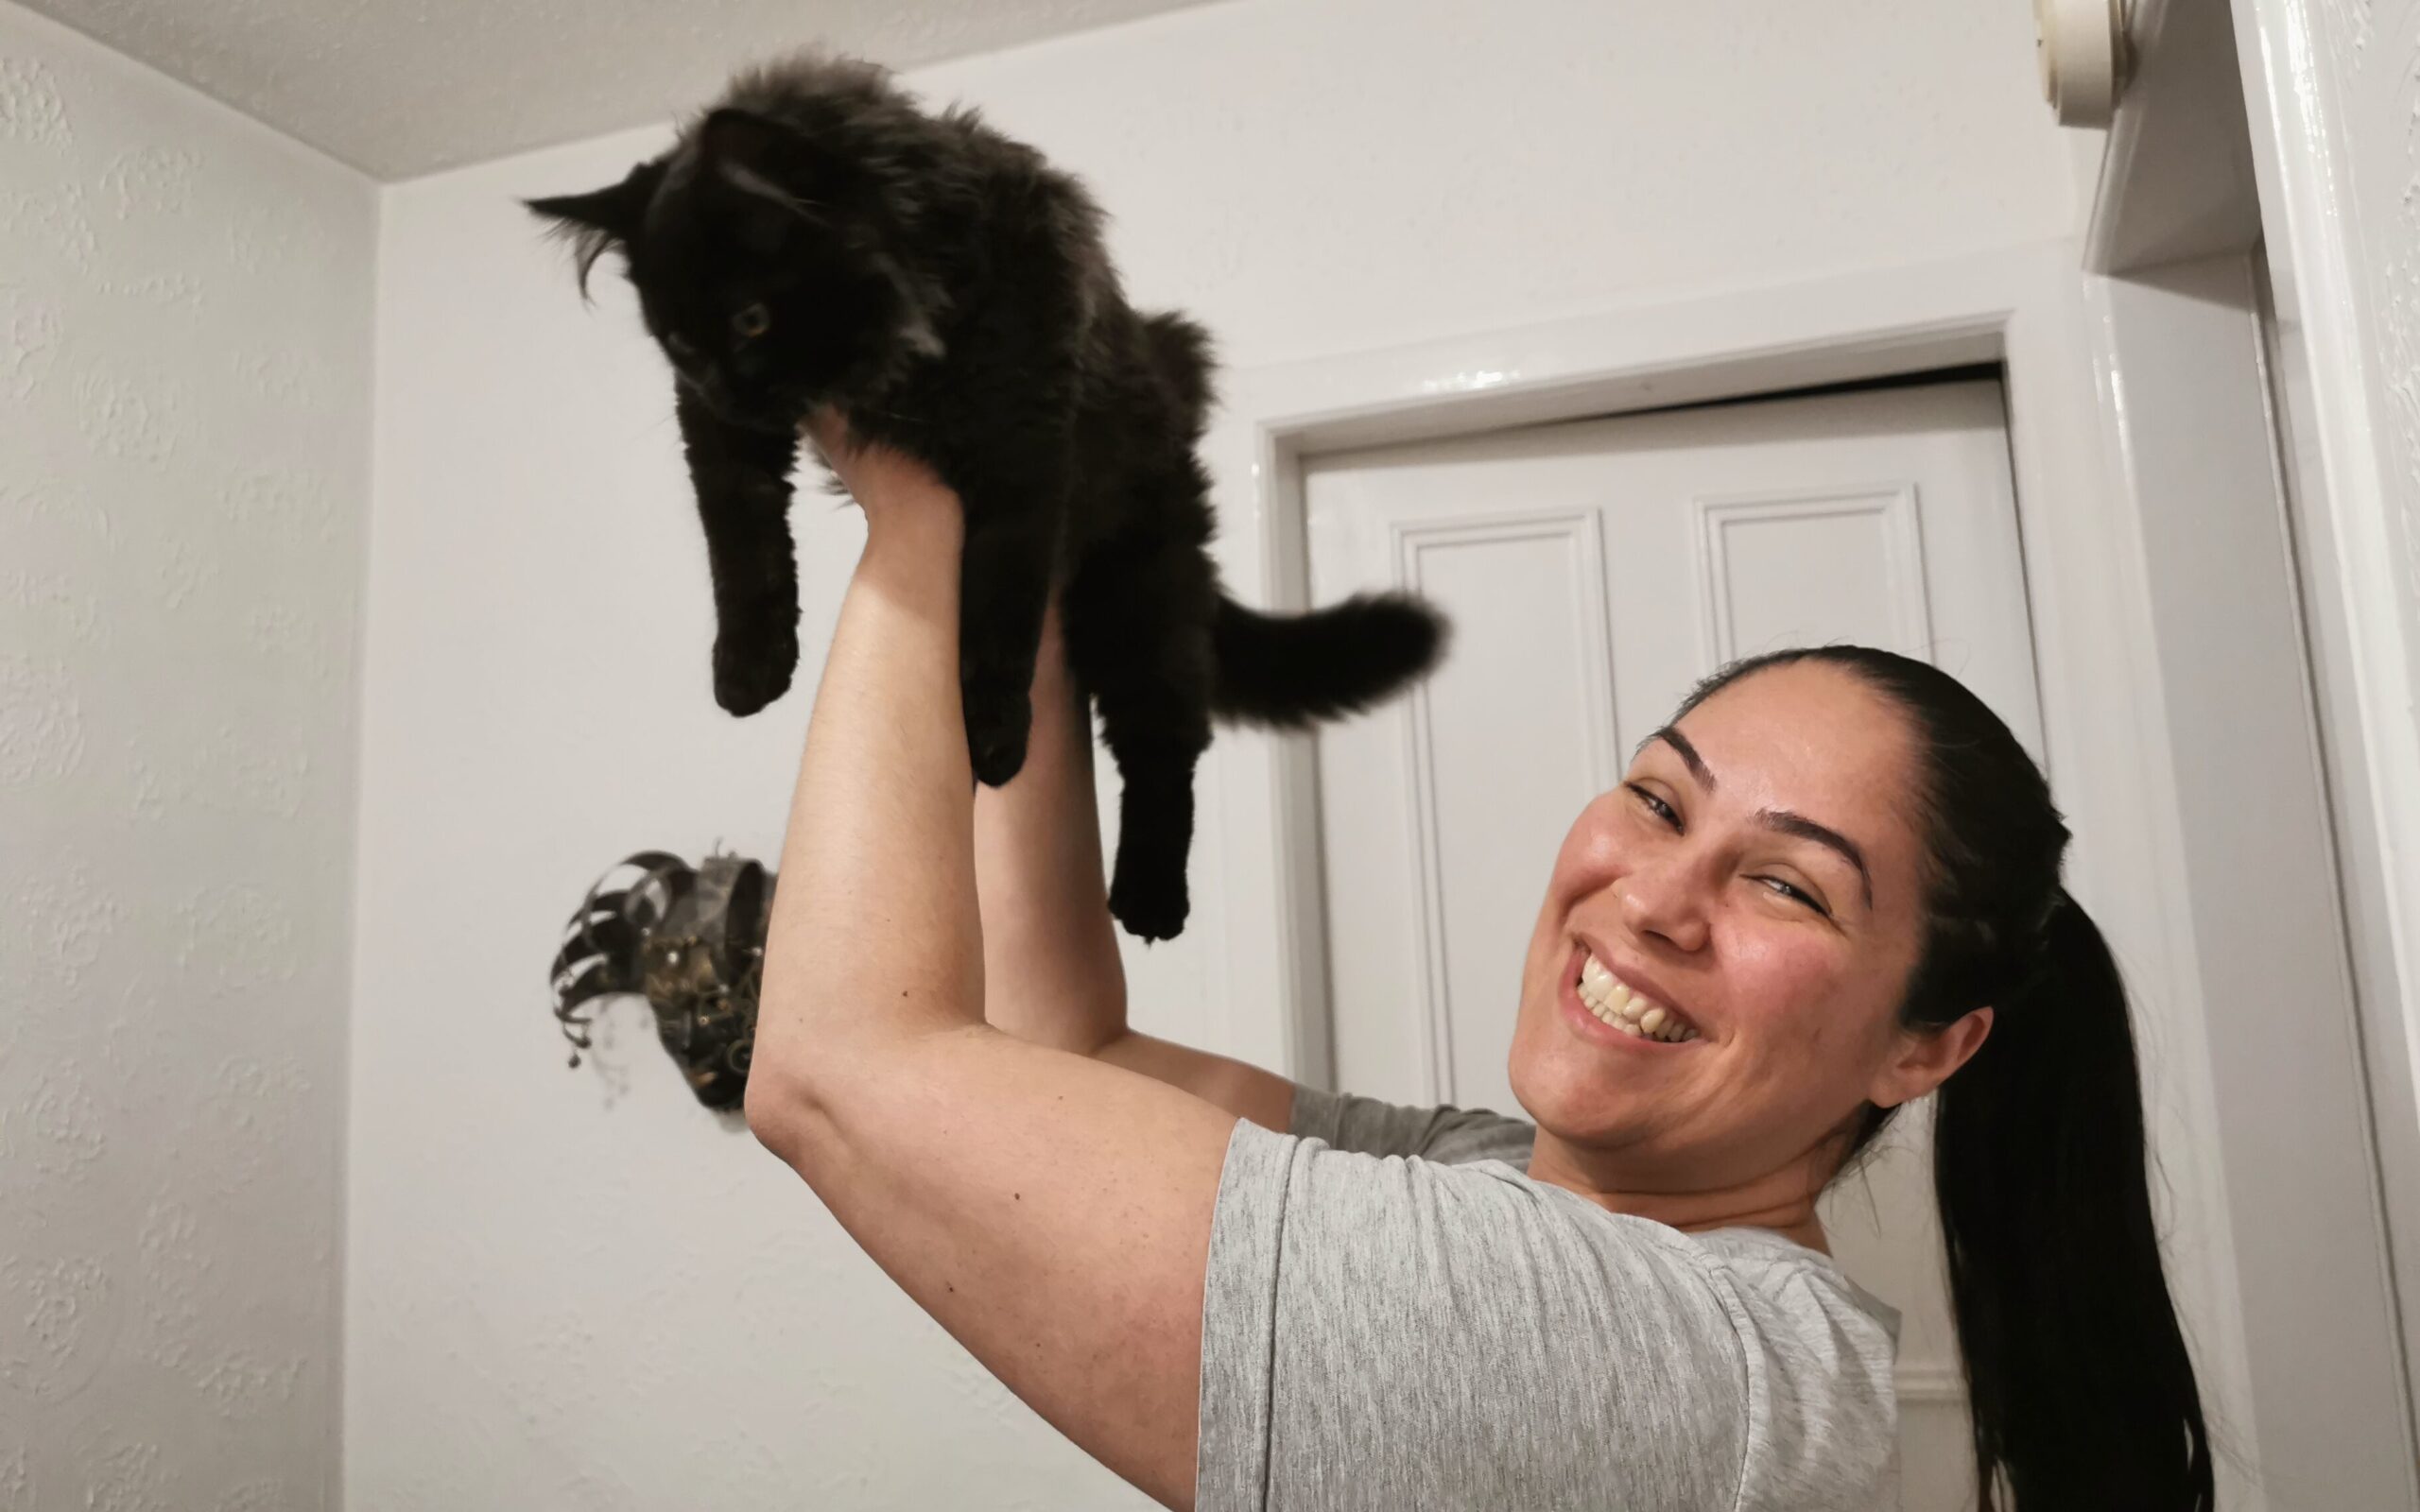 Ceza holding up her cat, Shadow, pretending to do the scene from Lion King.